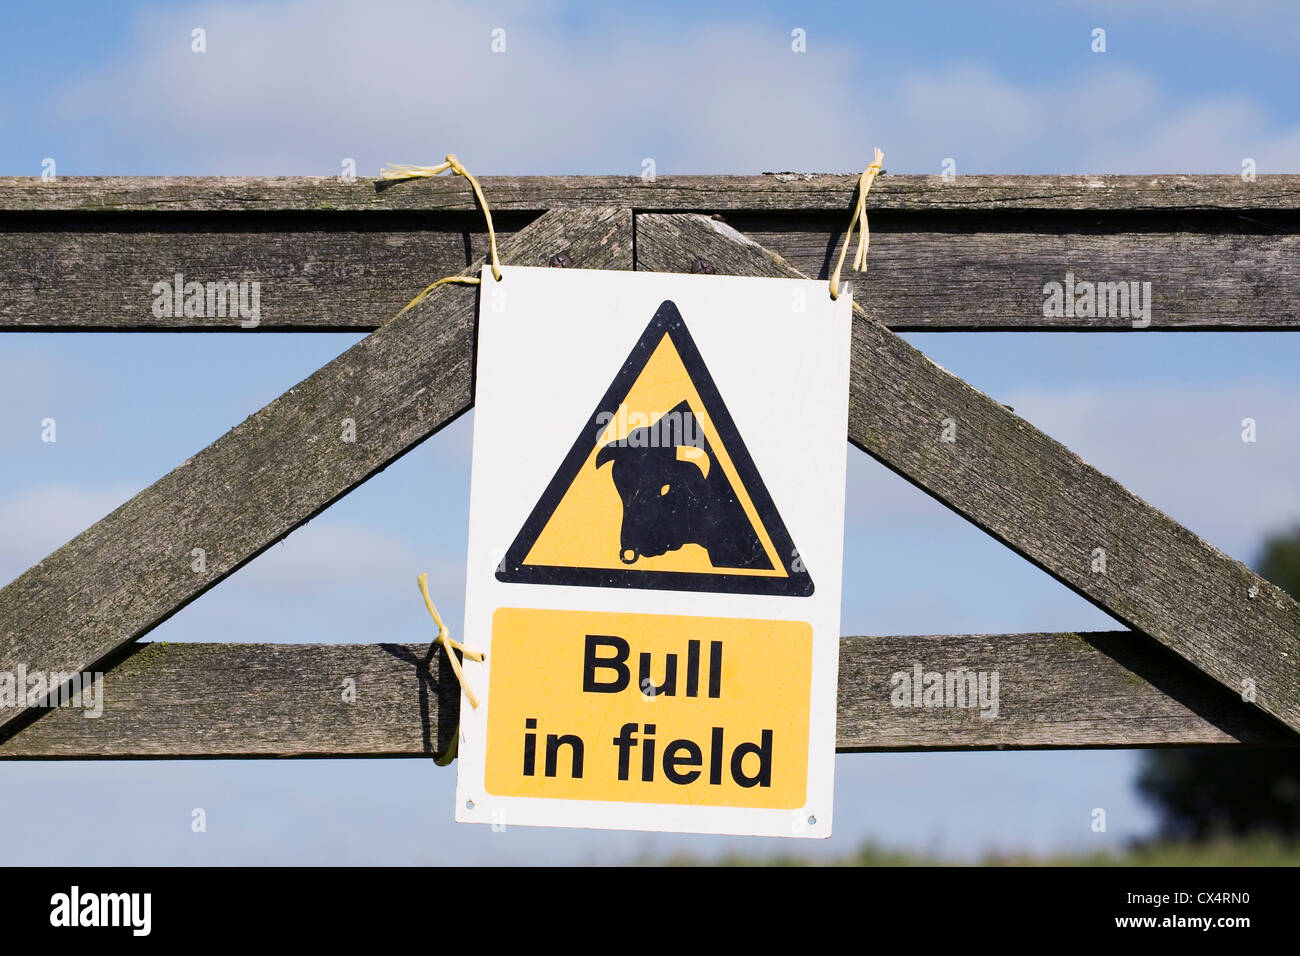 Bull in field warning sign on a wooden gate. Stock Photo